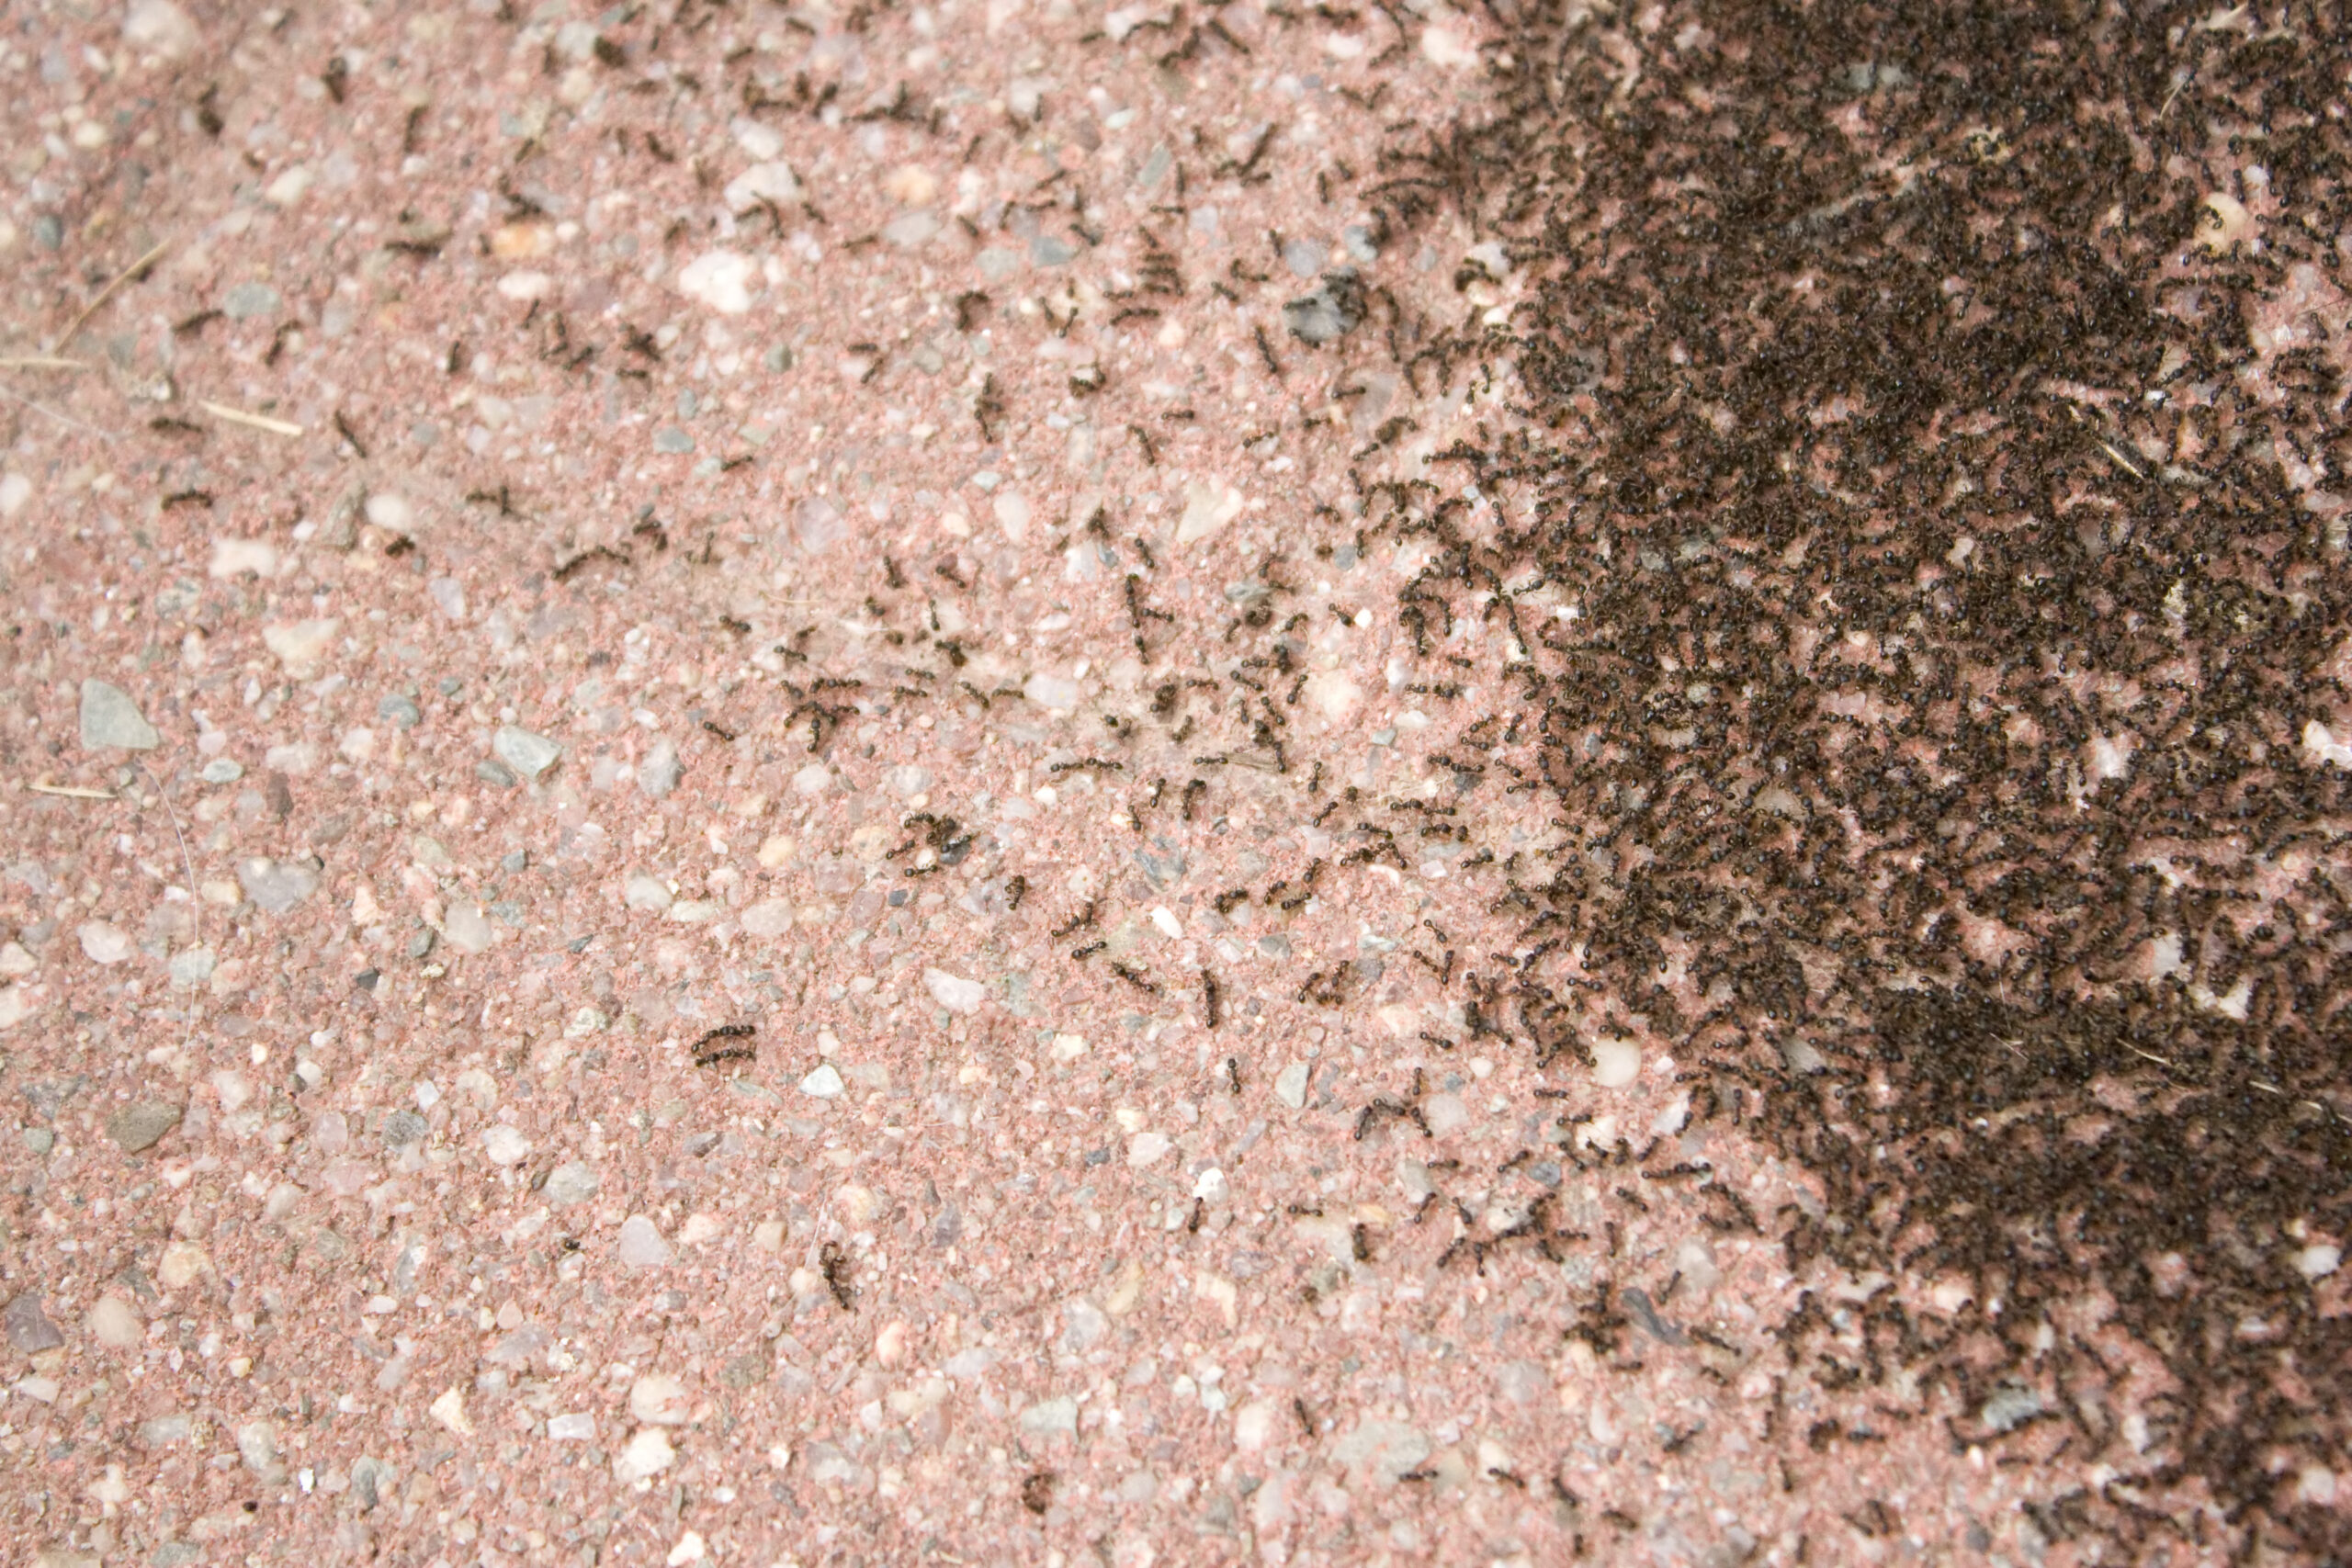 A colony of tiny ants swarming an area of the patio stone. It looks like coffee grounds.